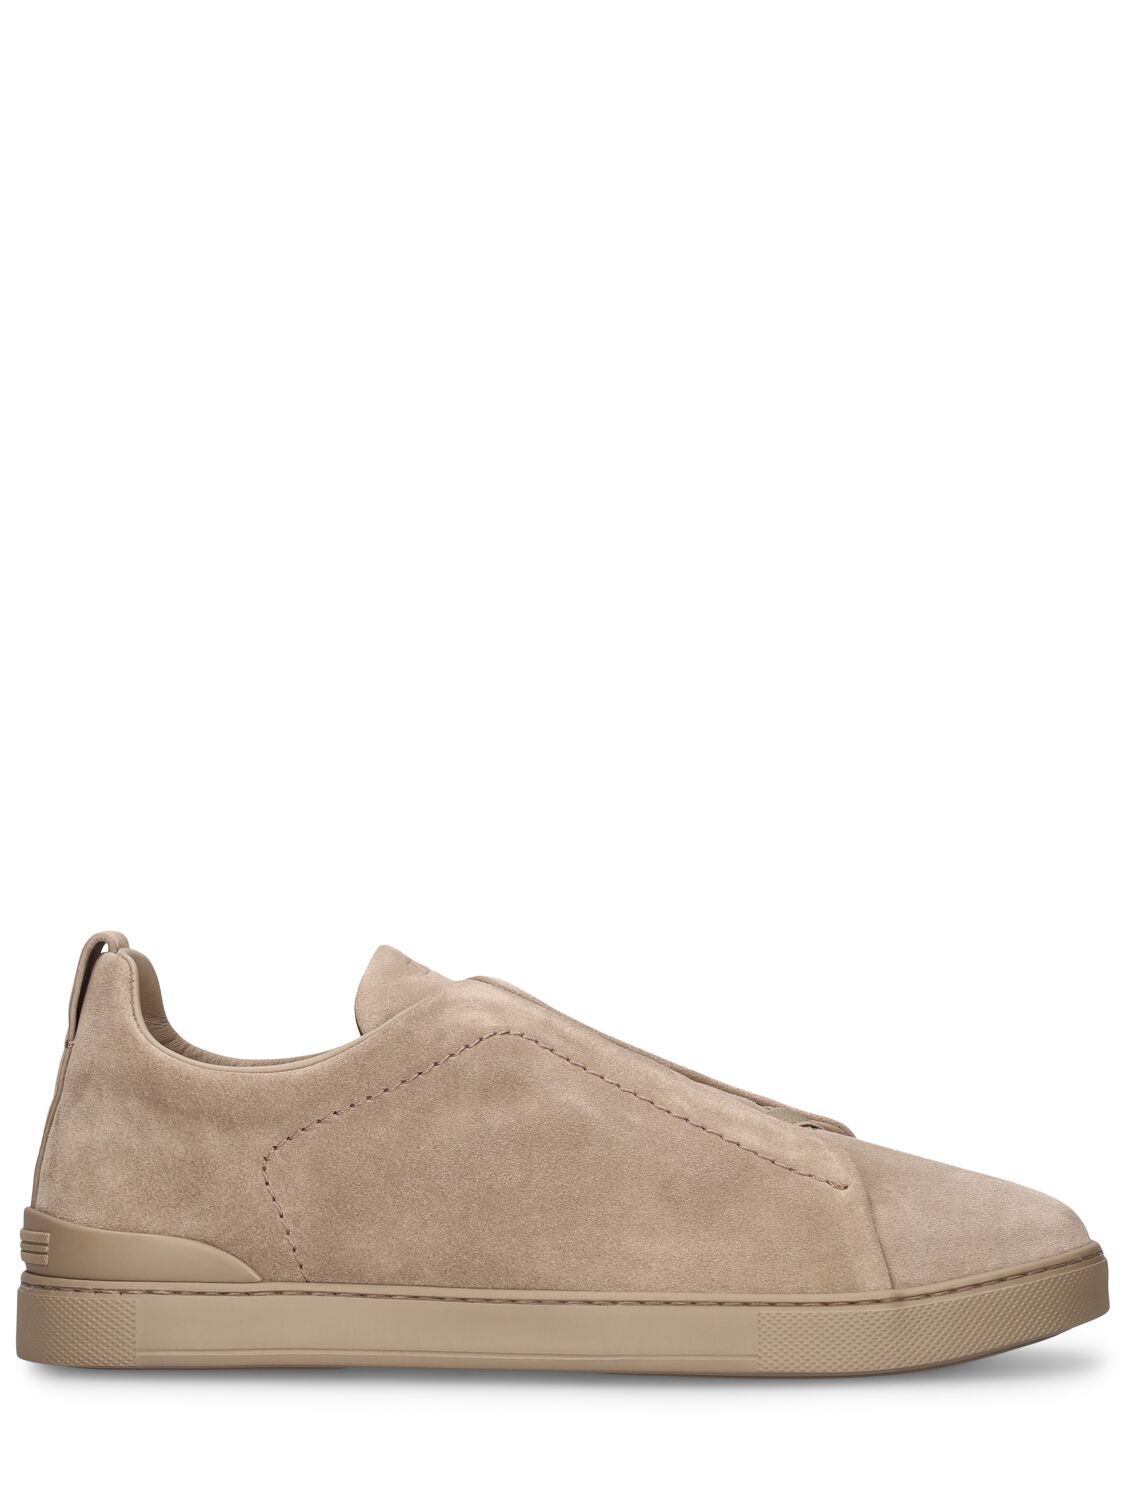 Zegna Triple Stitch Leather Low-top Sneakers In 라이트 베이지